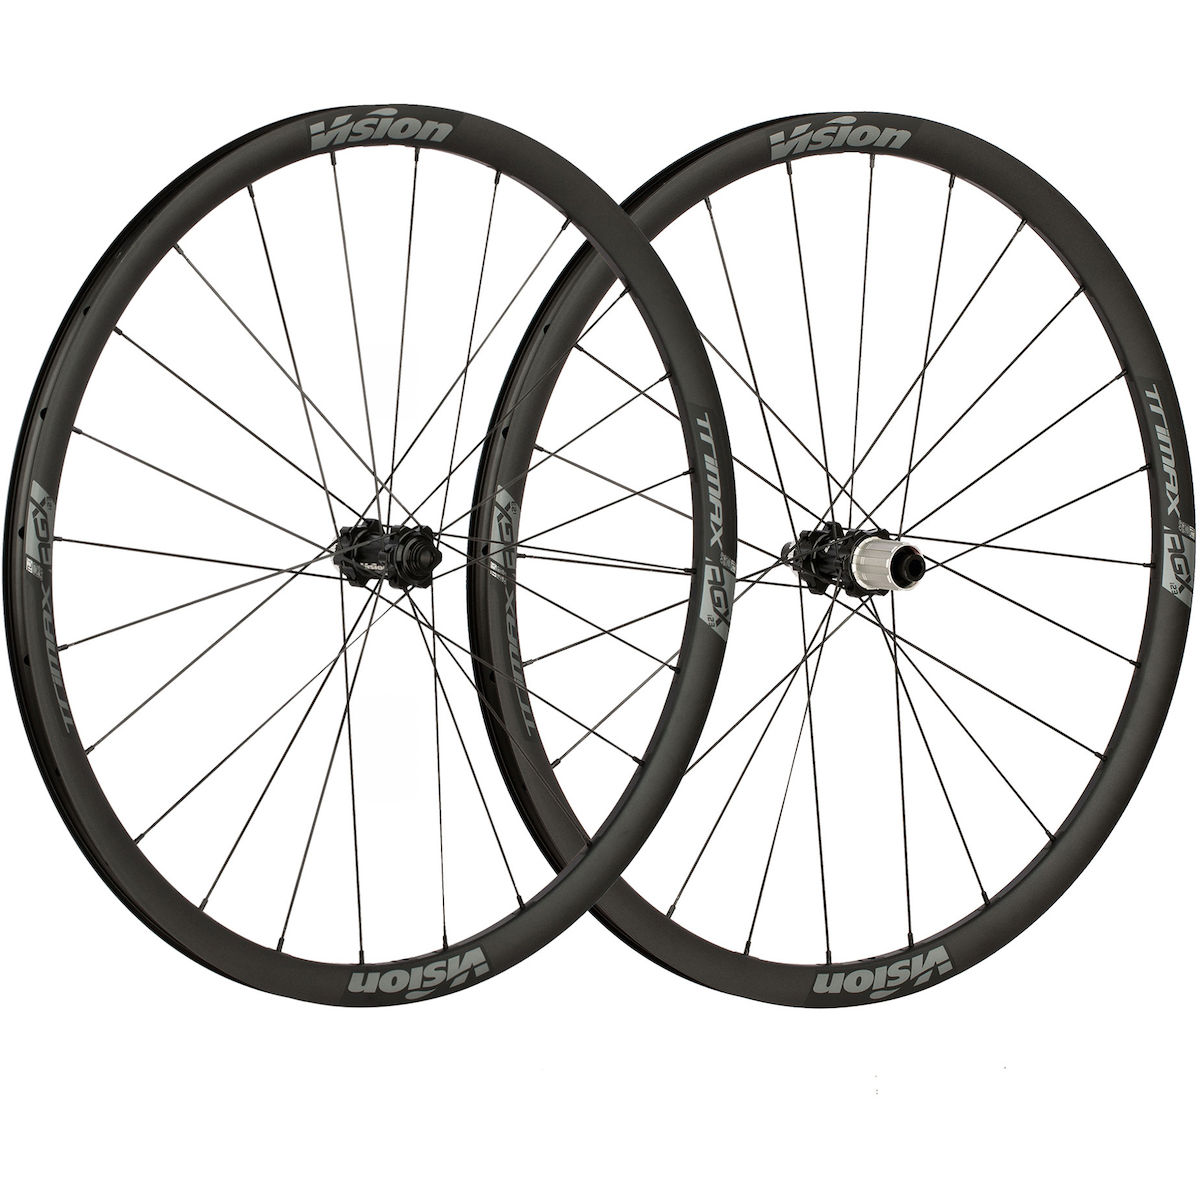 Picture of Vision Trimax AGX i23 Wheelset - TLR | Centerlock | 12x100mm | 12x142mm - Shimano HG